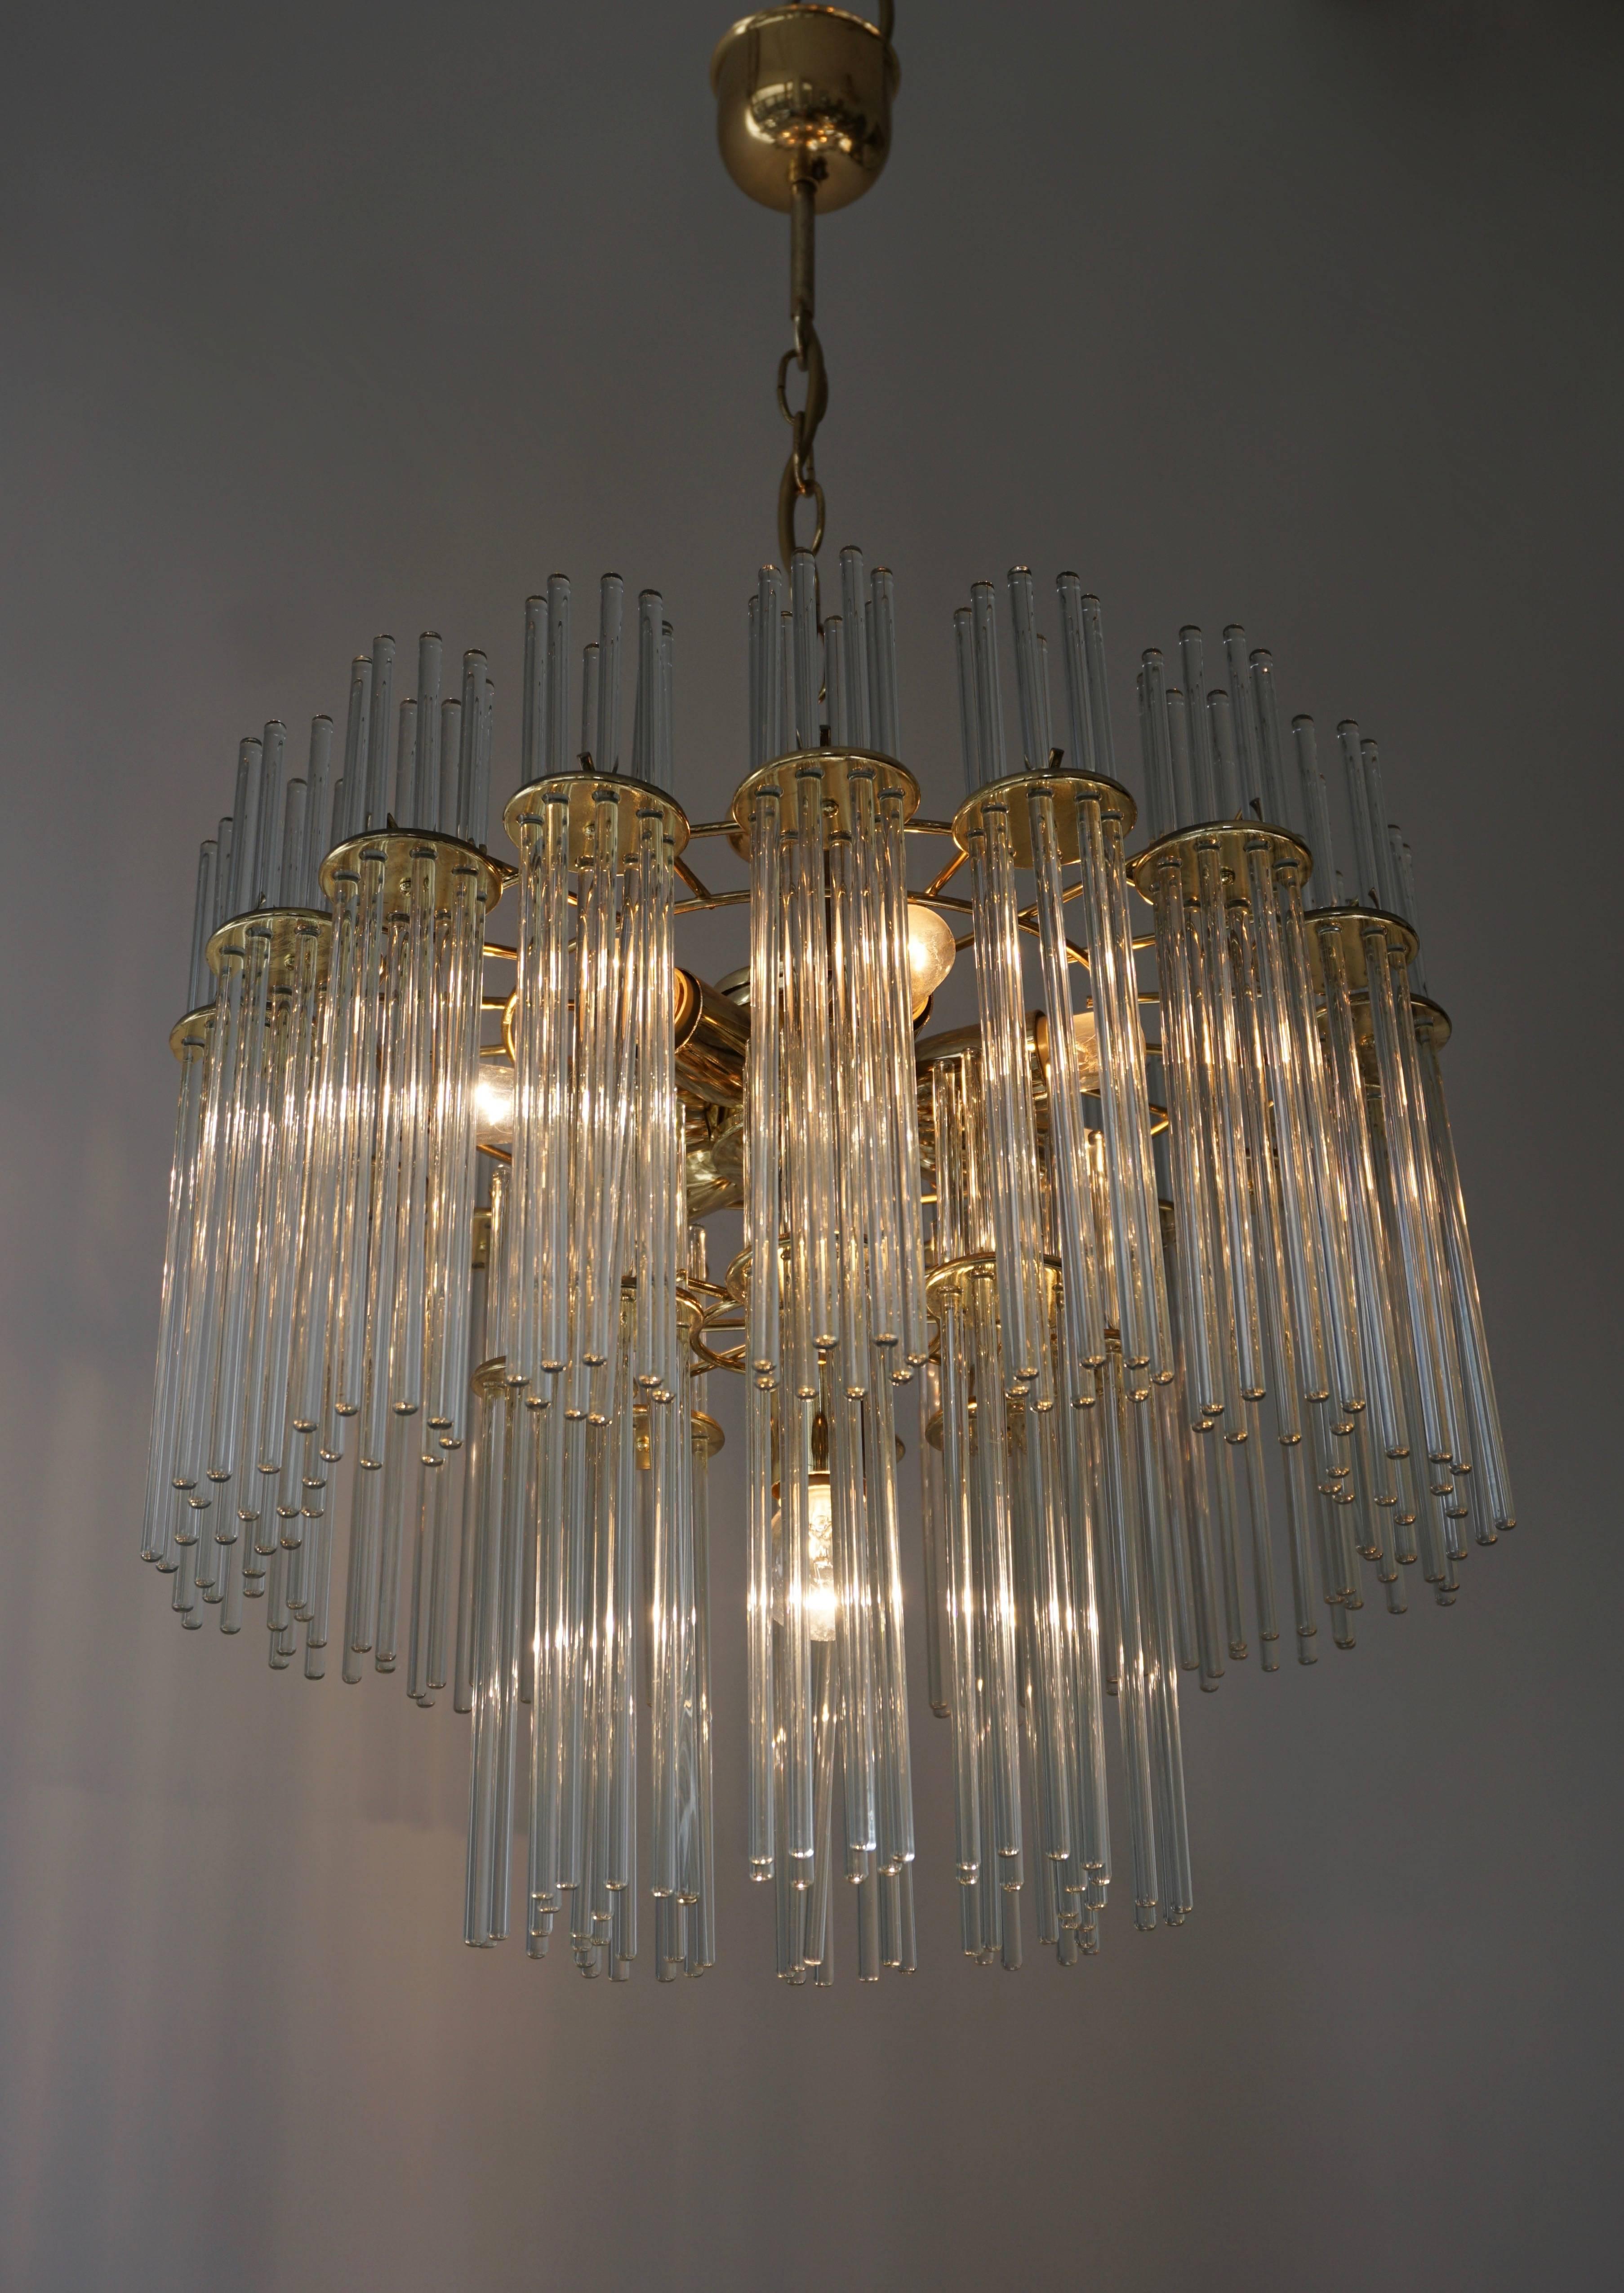 Italian Murano glass and brass chandelier.
Measures: Diameter:42 cm.
Height fixture 42 cm.
Total height with the chain:75 cm.